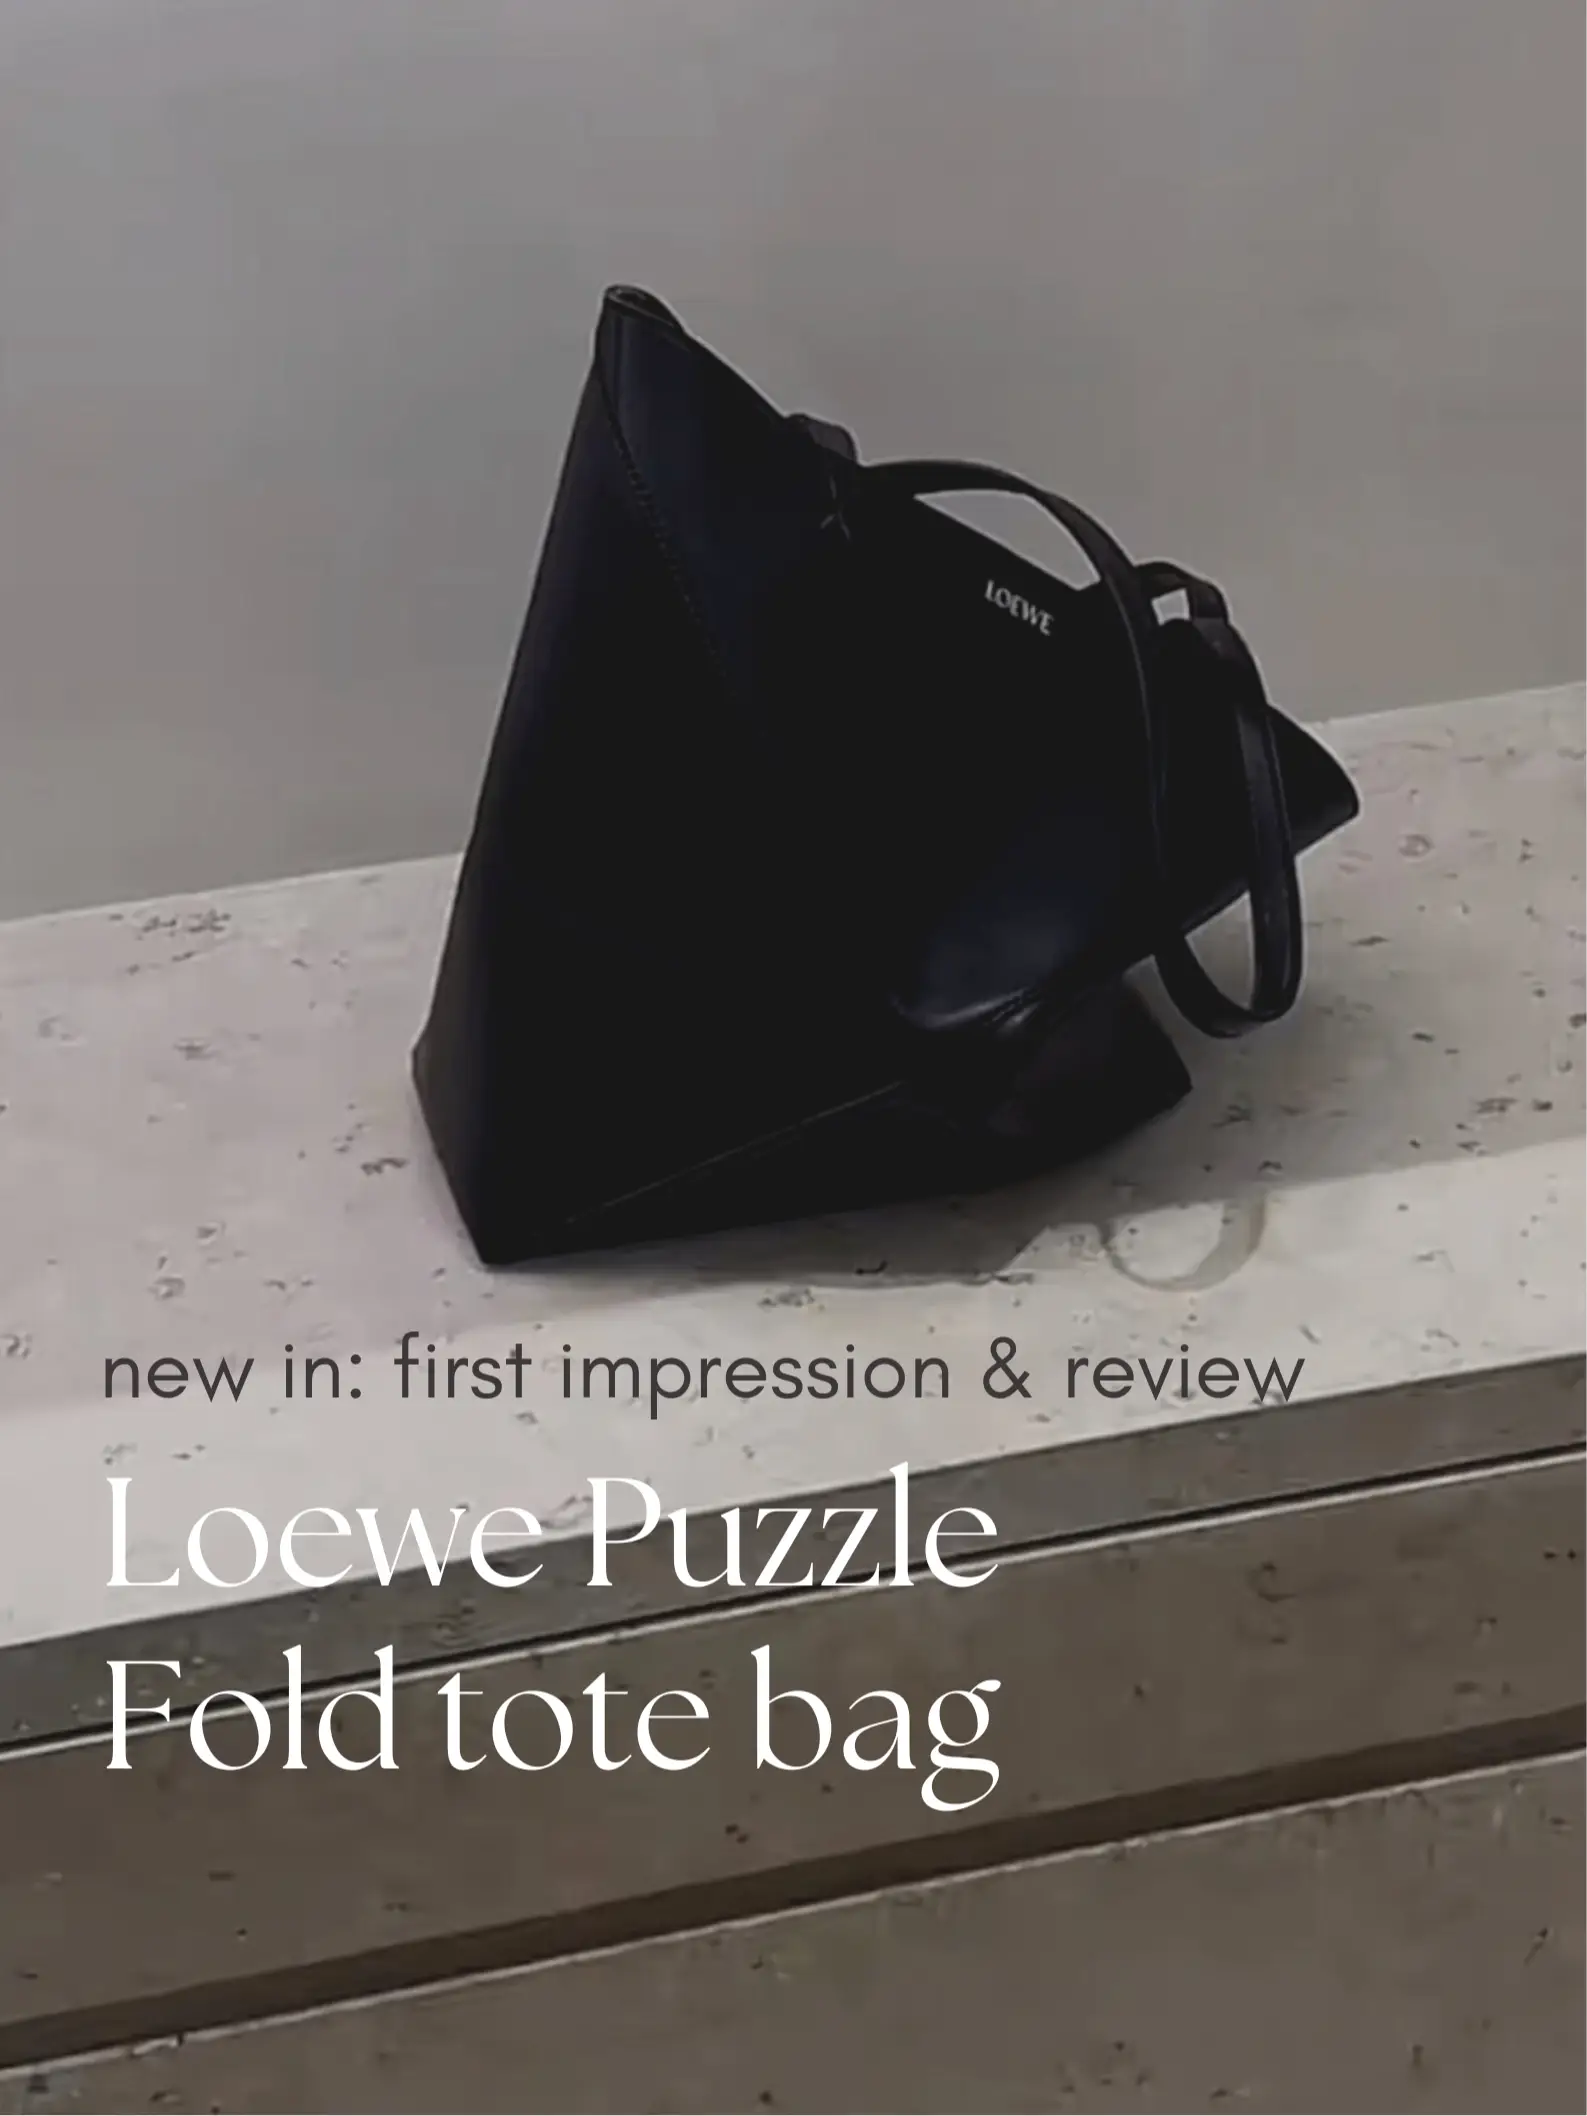 Why The Loewe Puzzle Fold Tote is the Bag of the Summer - Coveteur